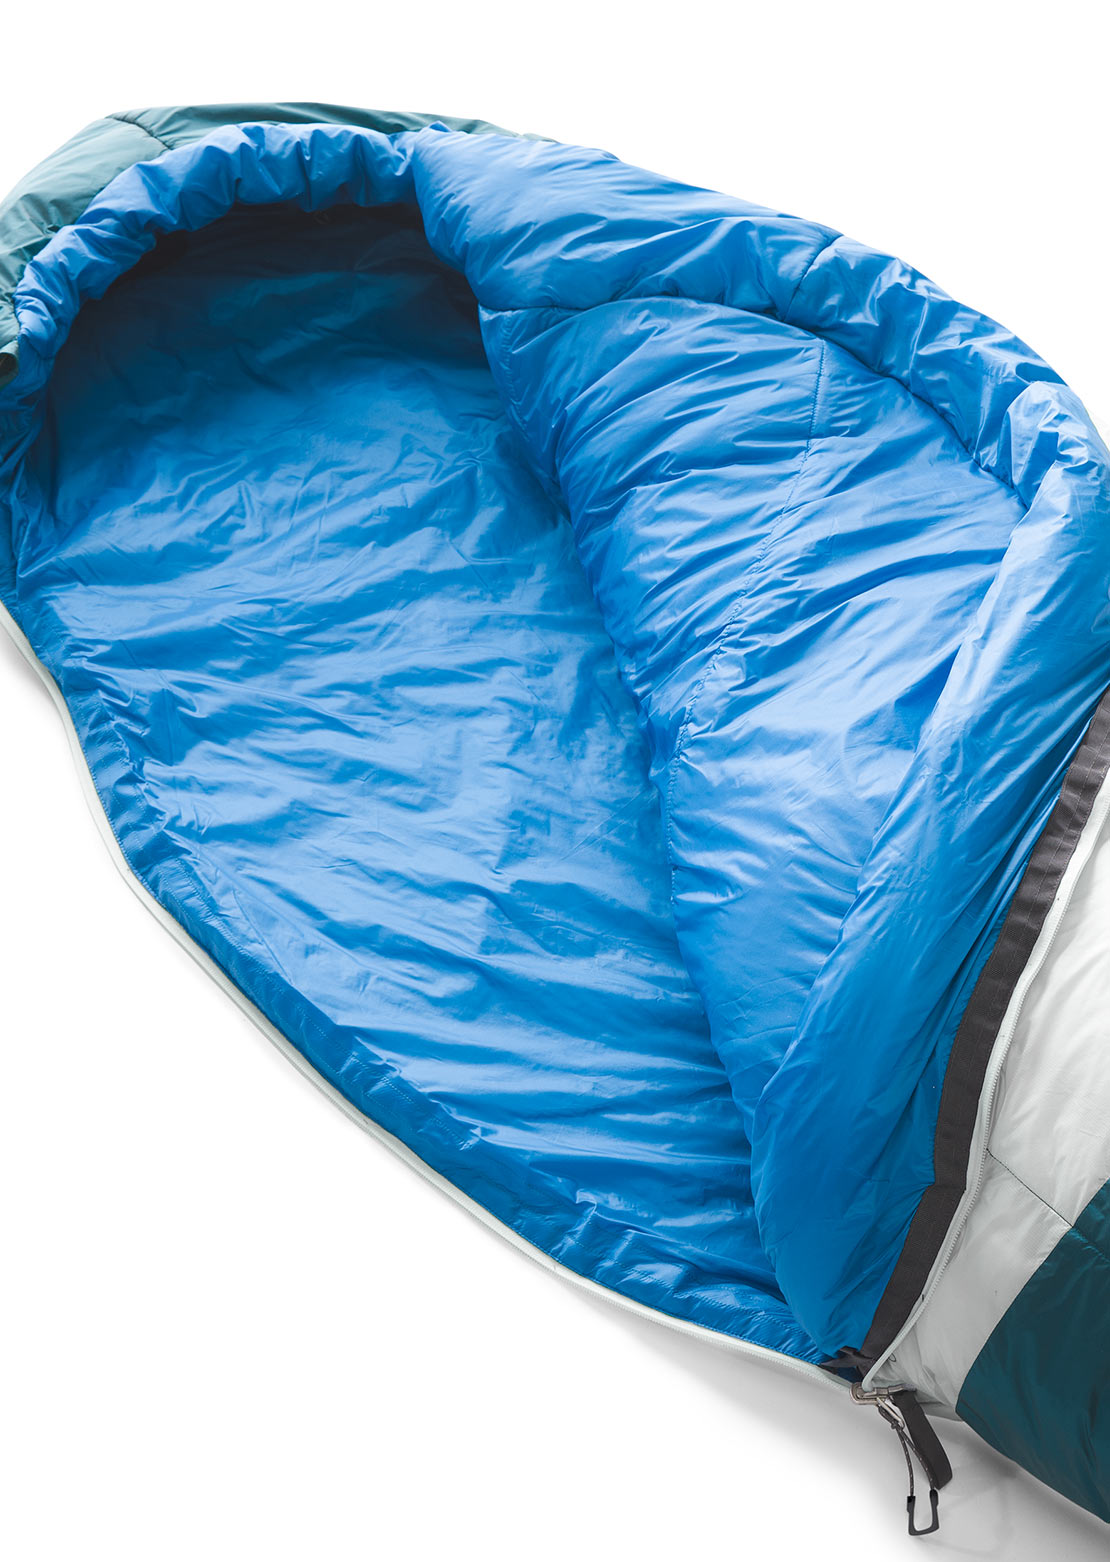 The North Face Cat&#39;s Meow Eco Right Handed Sleeping Bag Banff Blue/Tin Grey